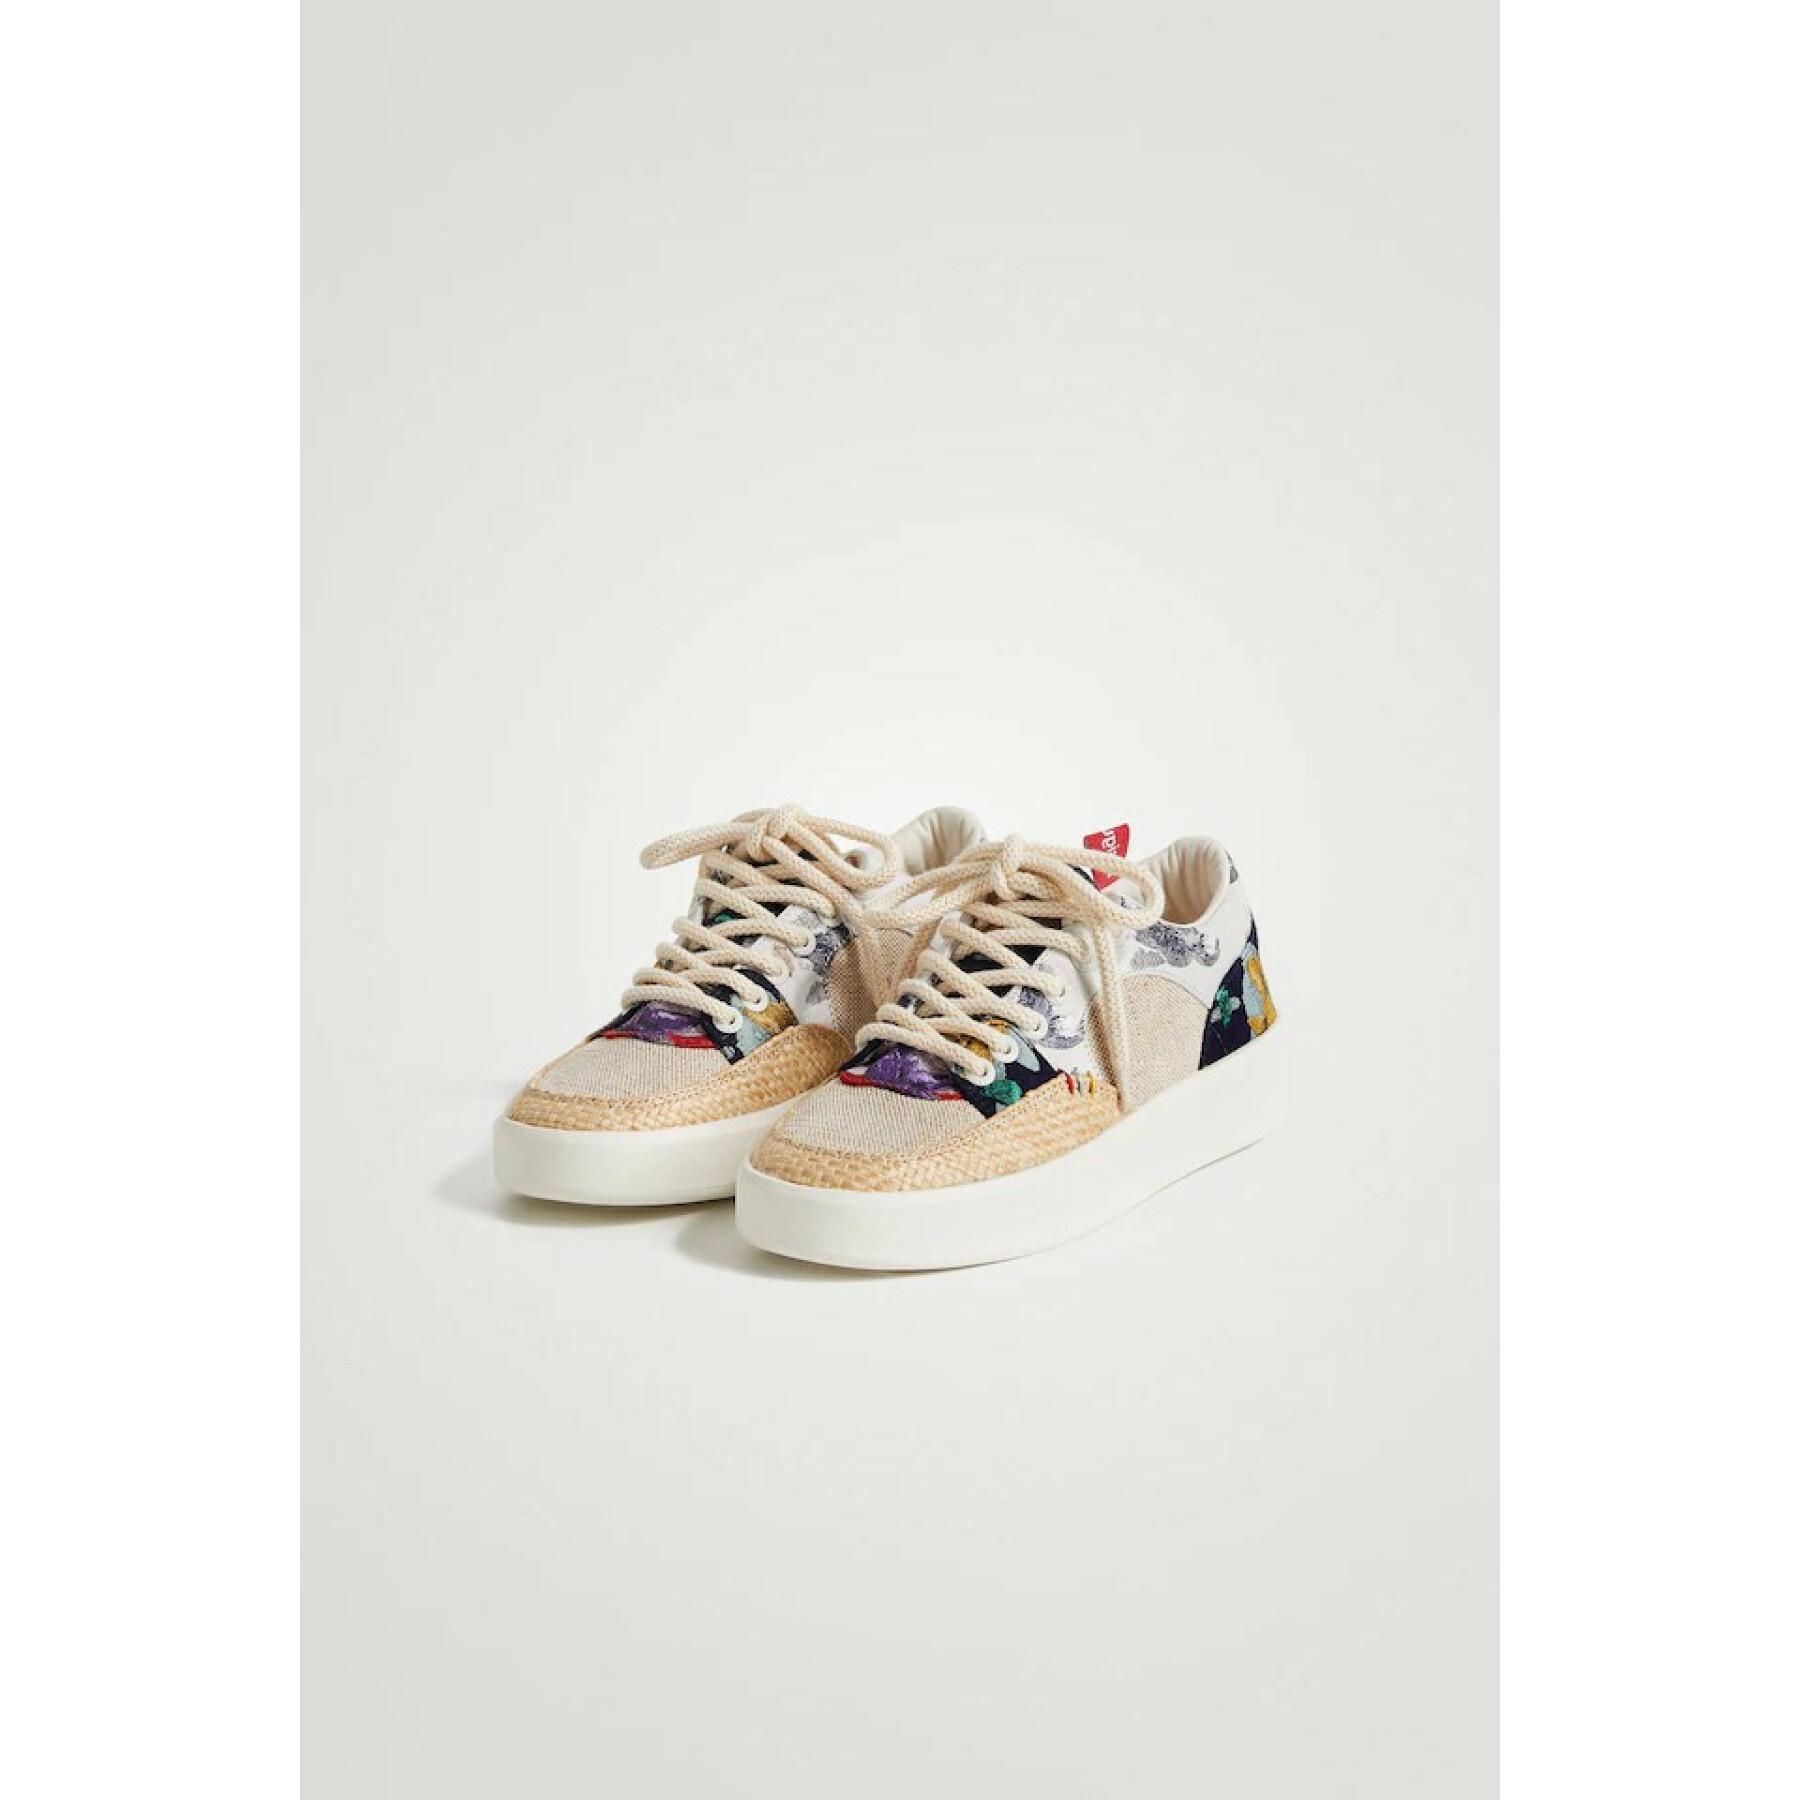 Women's sneakers Desigual Fancy Crafted